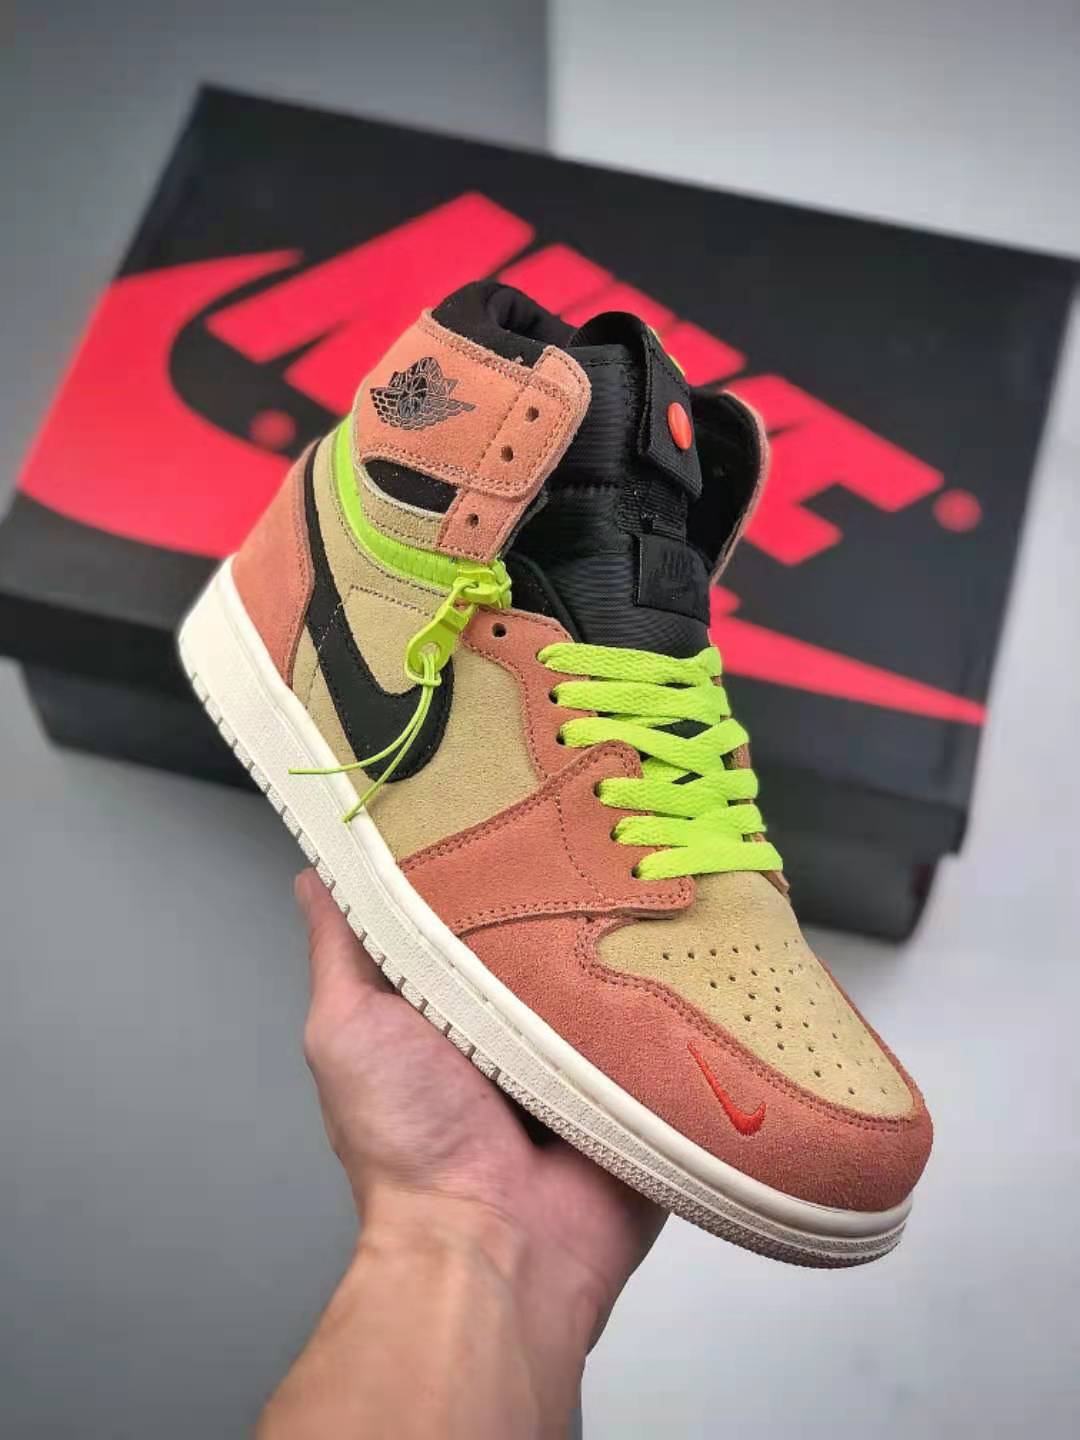 Air Jordan 1 High Switch 'Pink Volt' CW6576-800 - Futuristic Style and Vibrant Colors